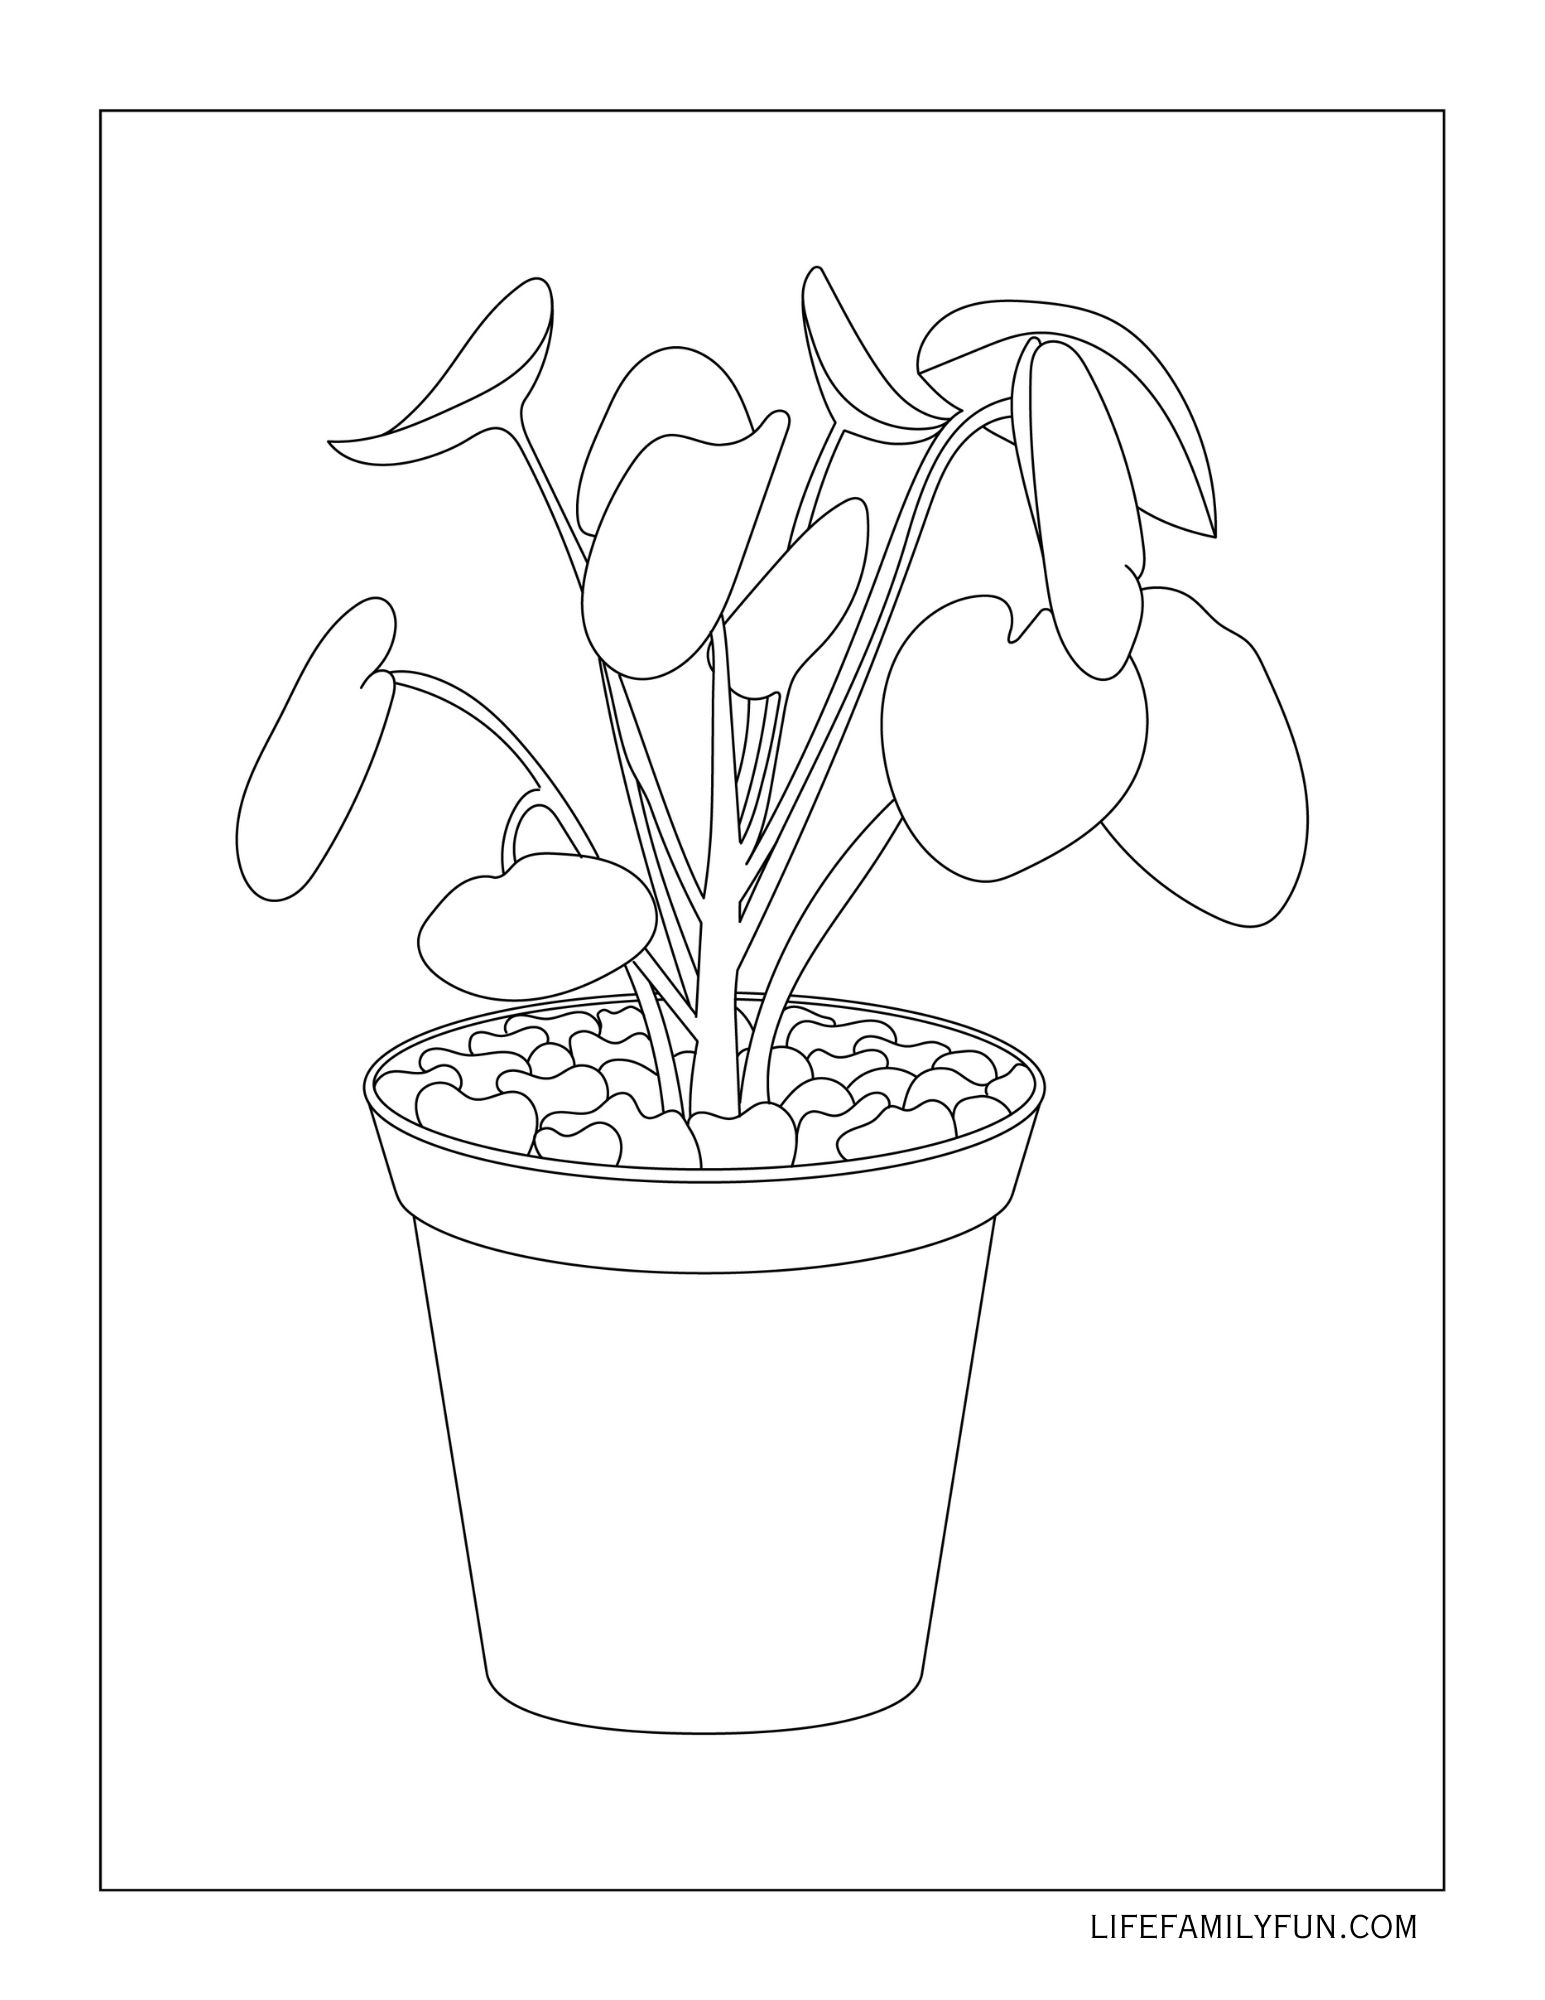 Free Coloring Page with Plants